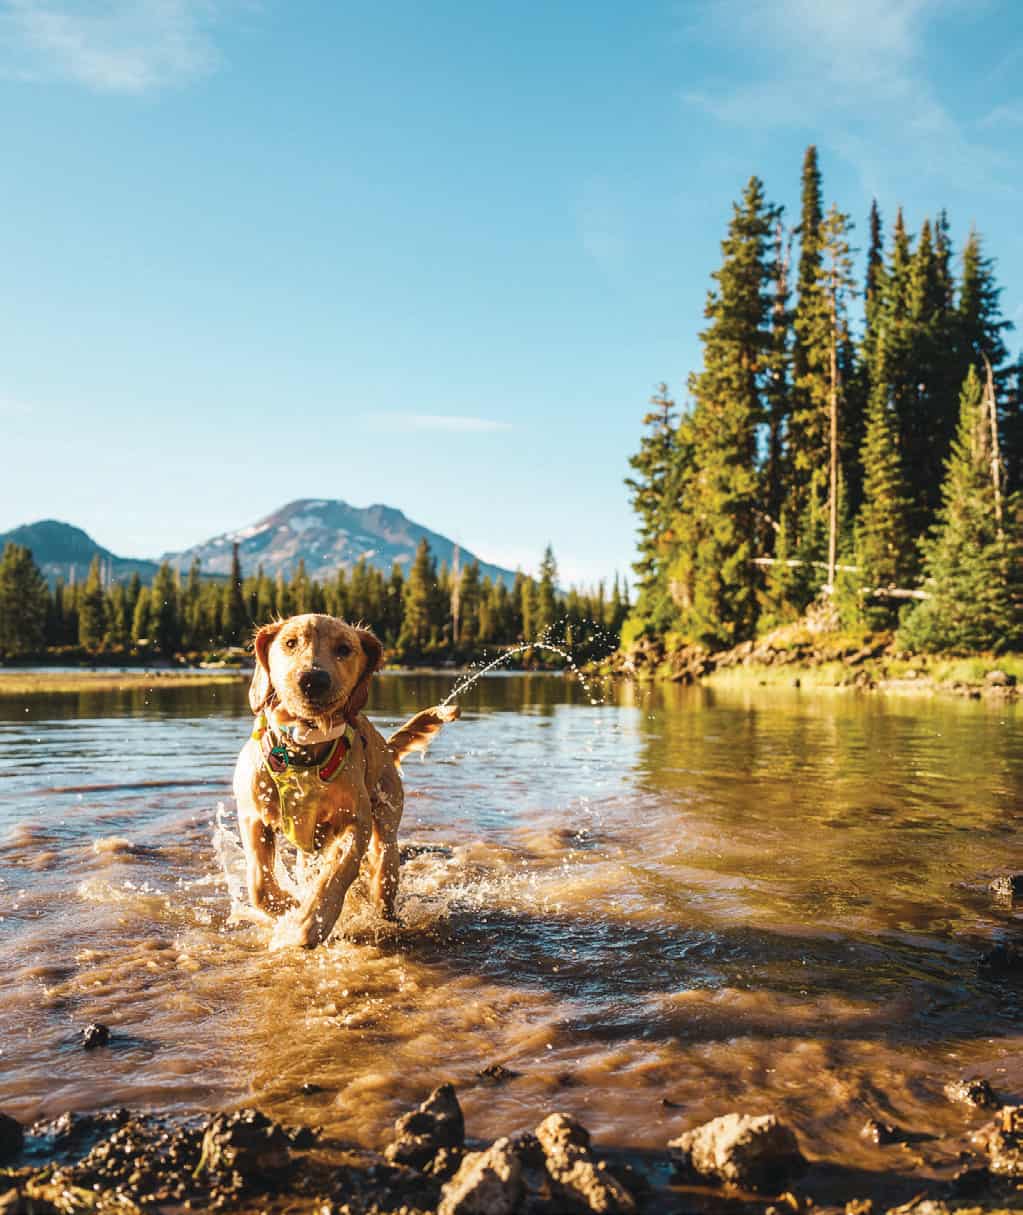 There are some spots in Central Oregon where pups can roam free.